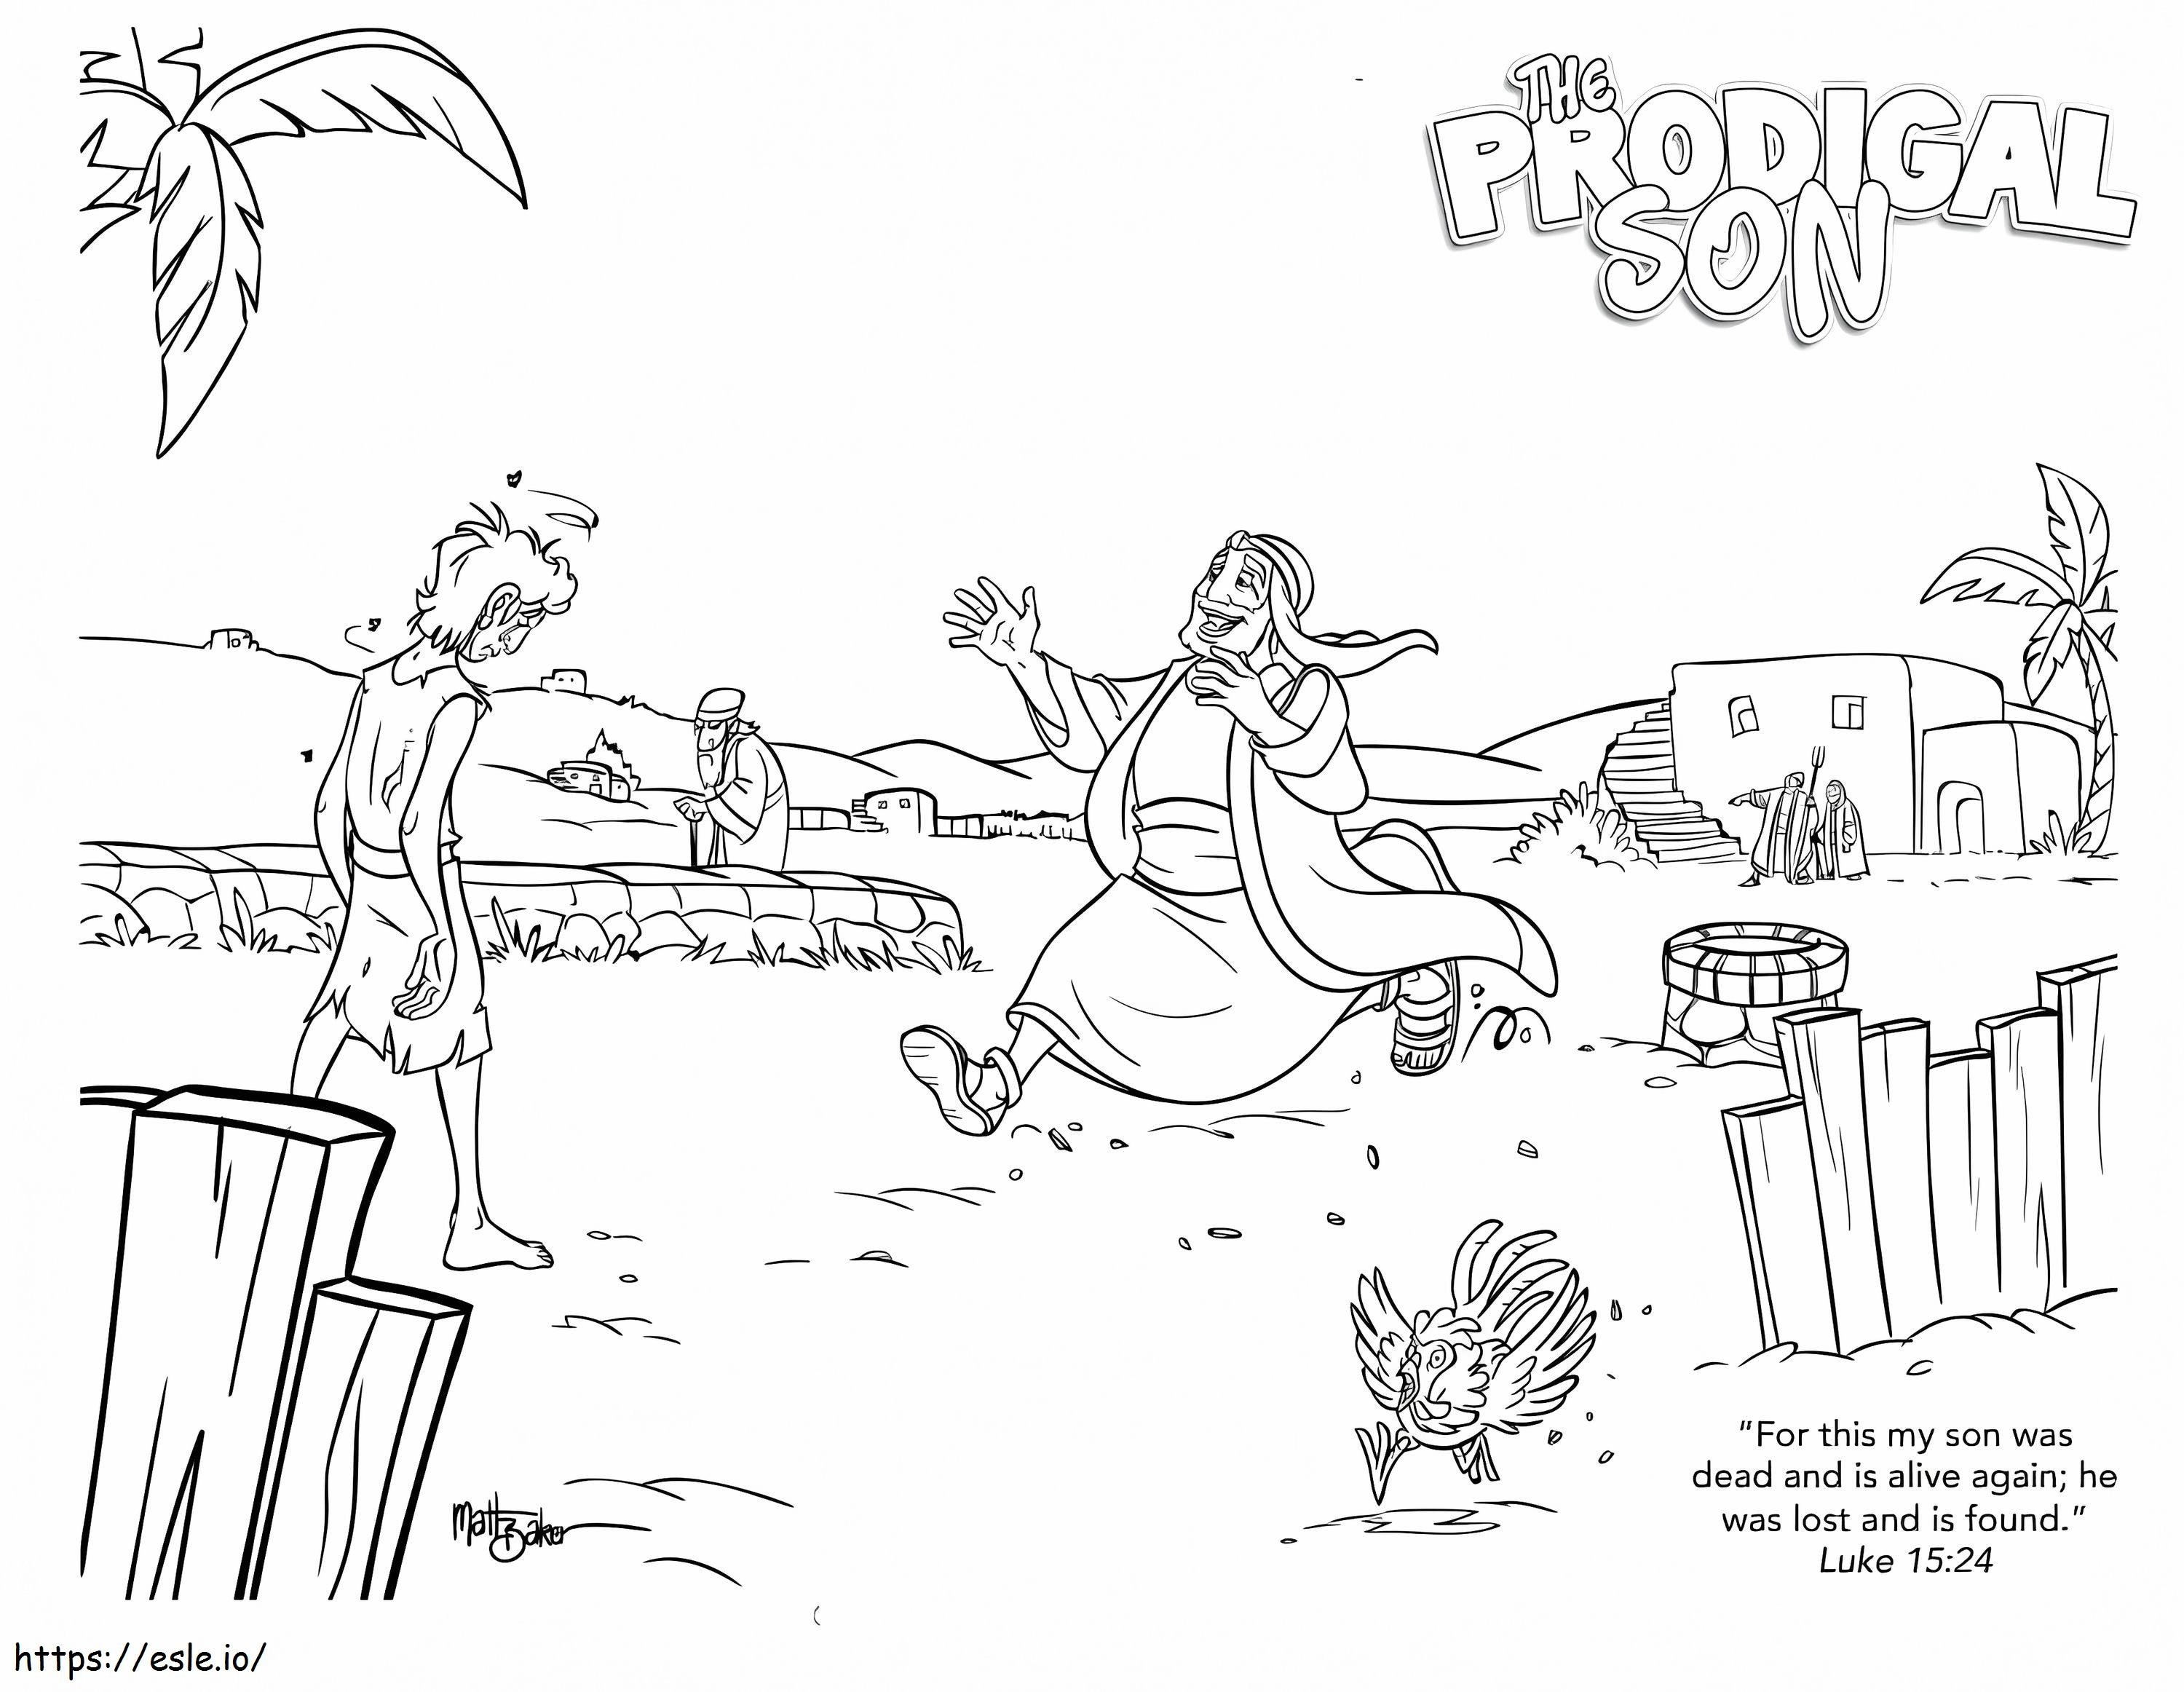 Prodigal Son 9 coloring page